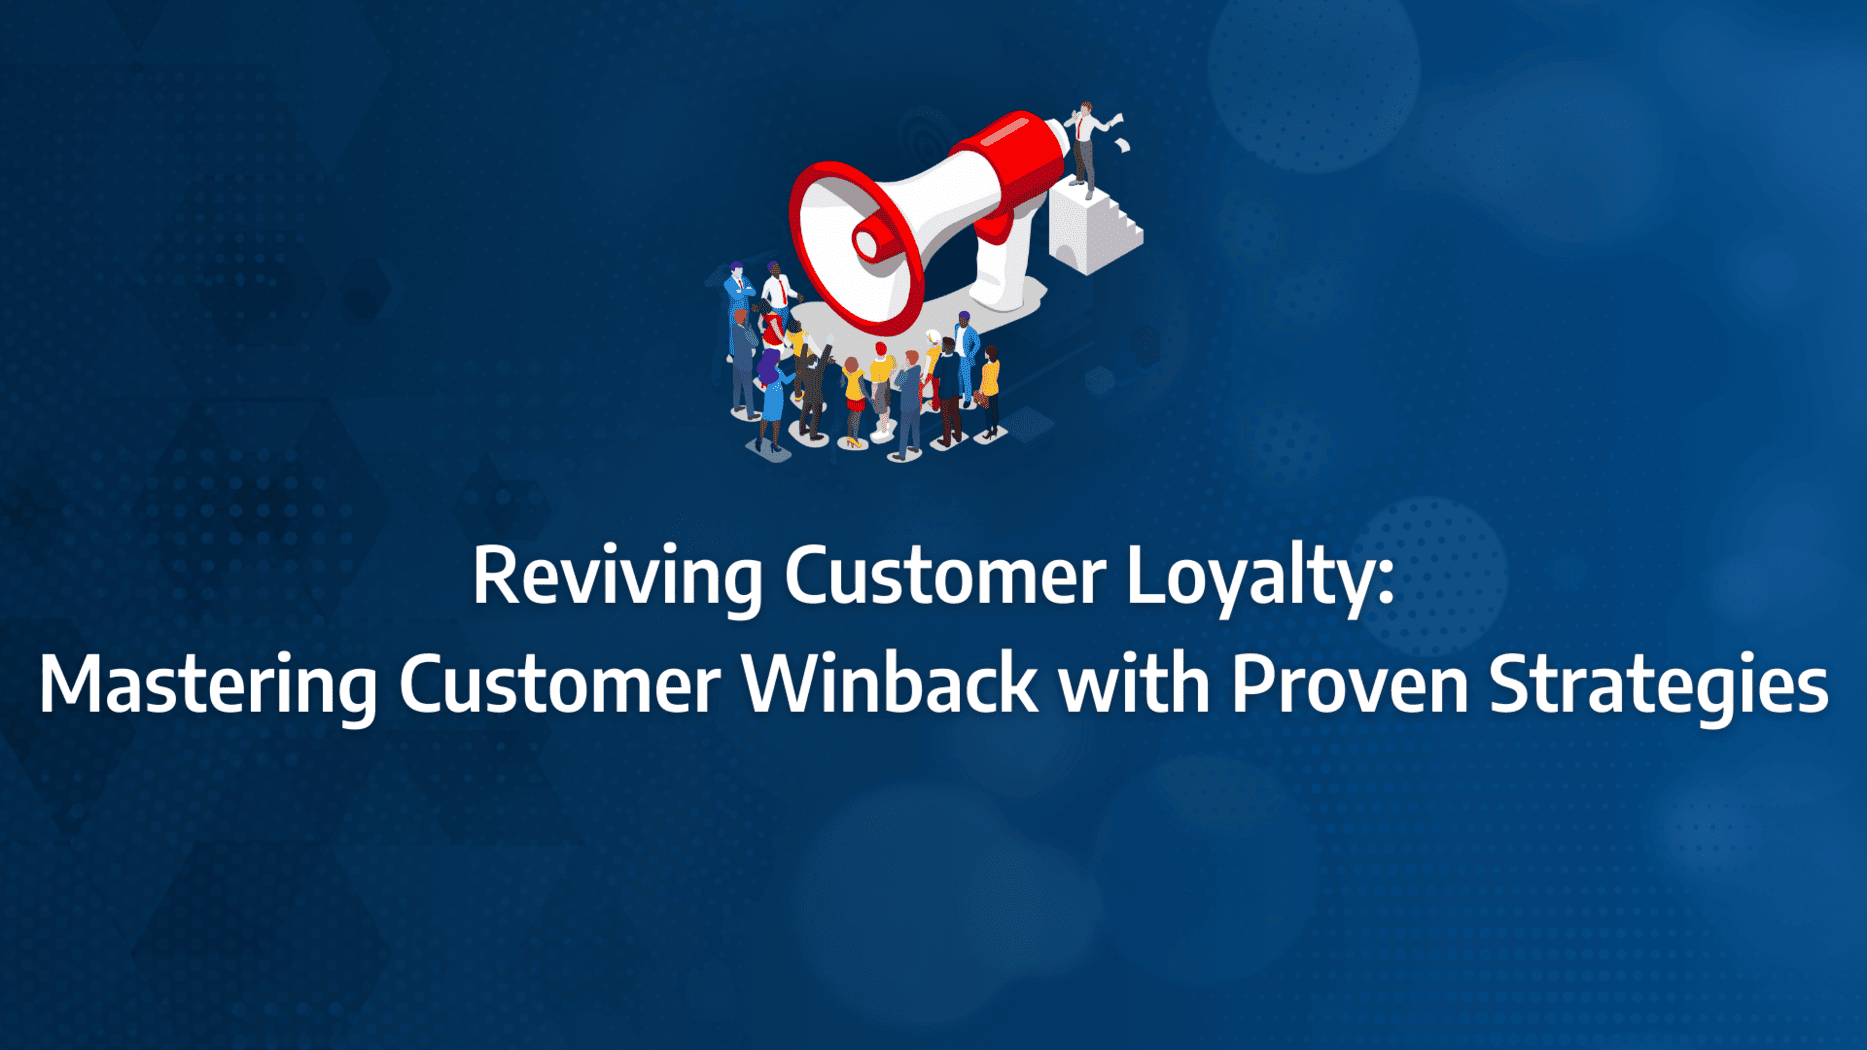 Customer winback: effectively revitalised through targeted winback campaigns, strategic email flows, meticulously crafted winback strategies, and data-driven customer re-engagement efforts.: strategy framework diagram for customer winback campaign, customer winback flow, customer winback emails, customer winback strategies